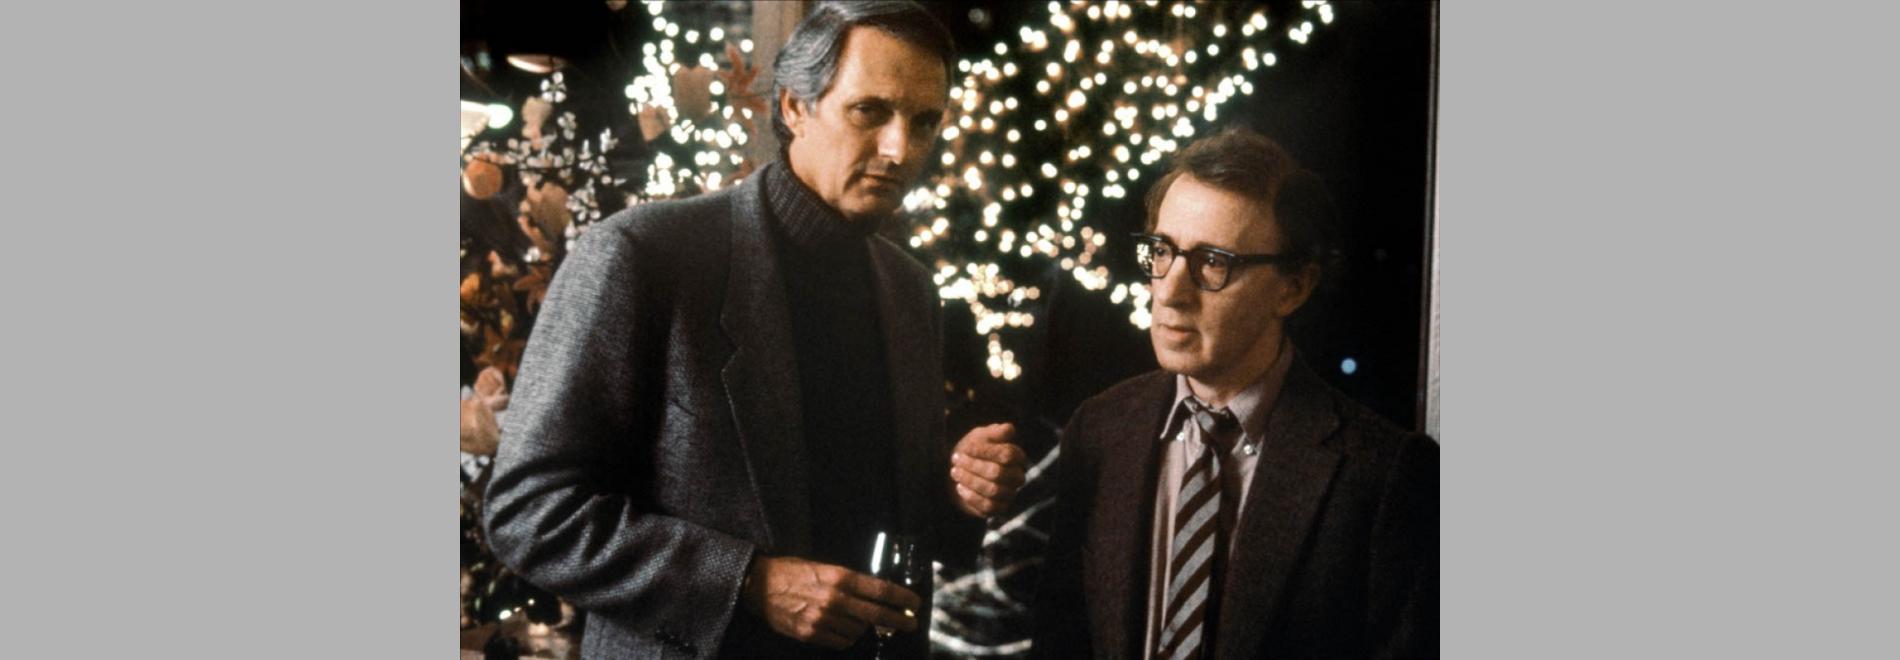 Crimes and Misdemeanors (Woody Allen, 1989)